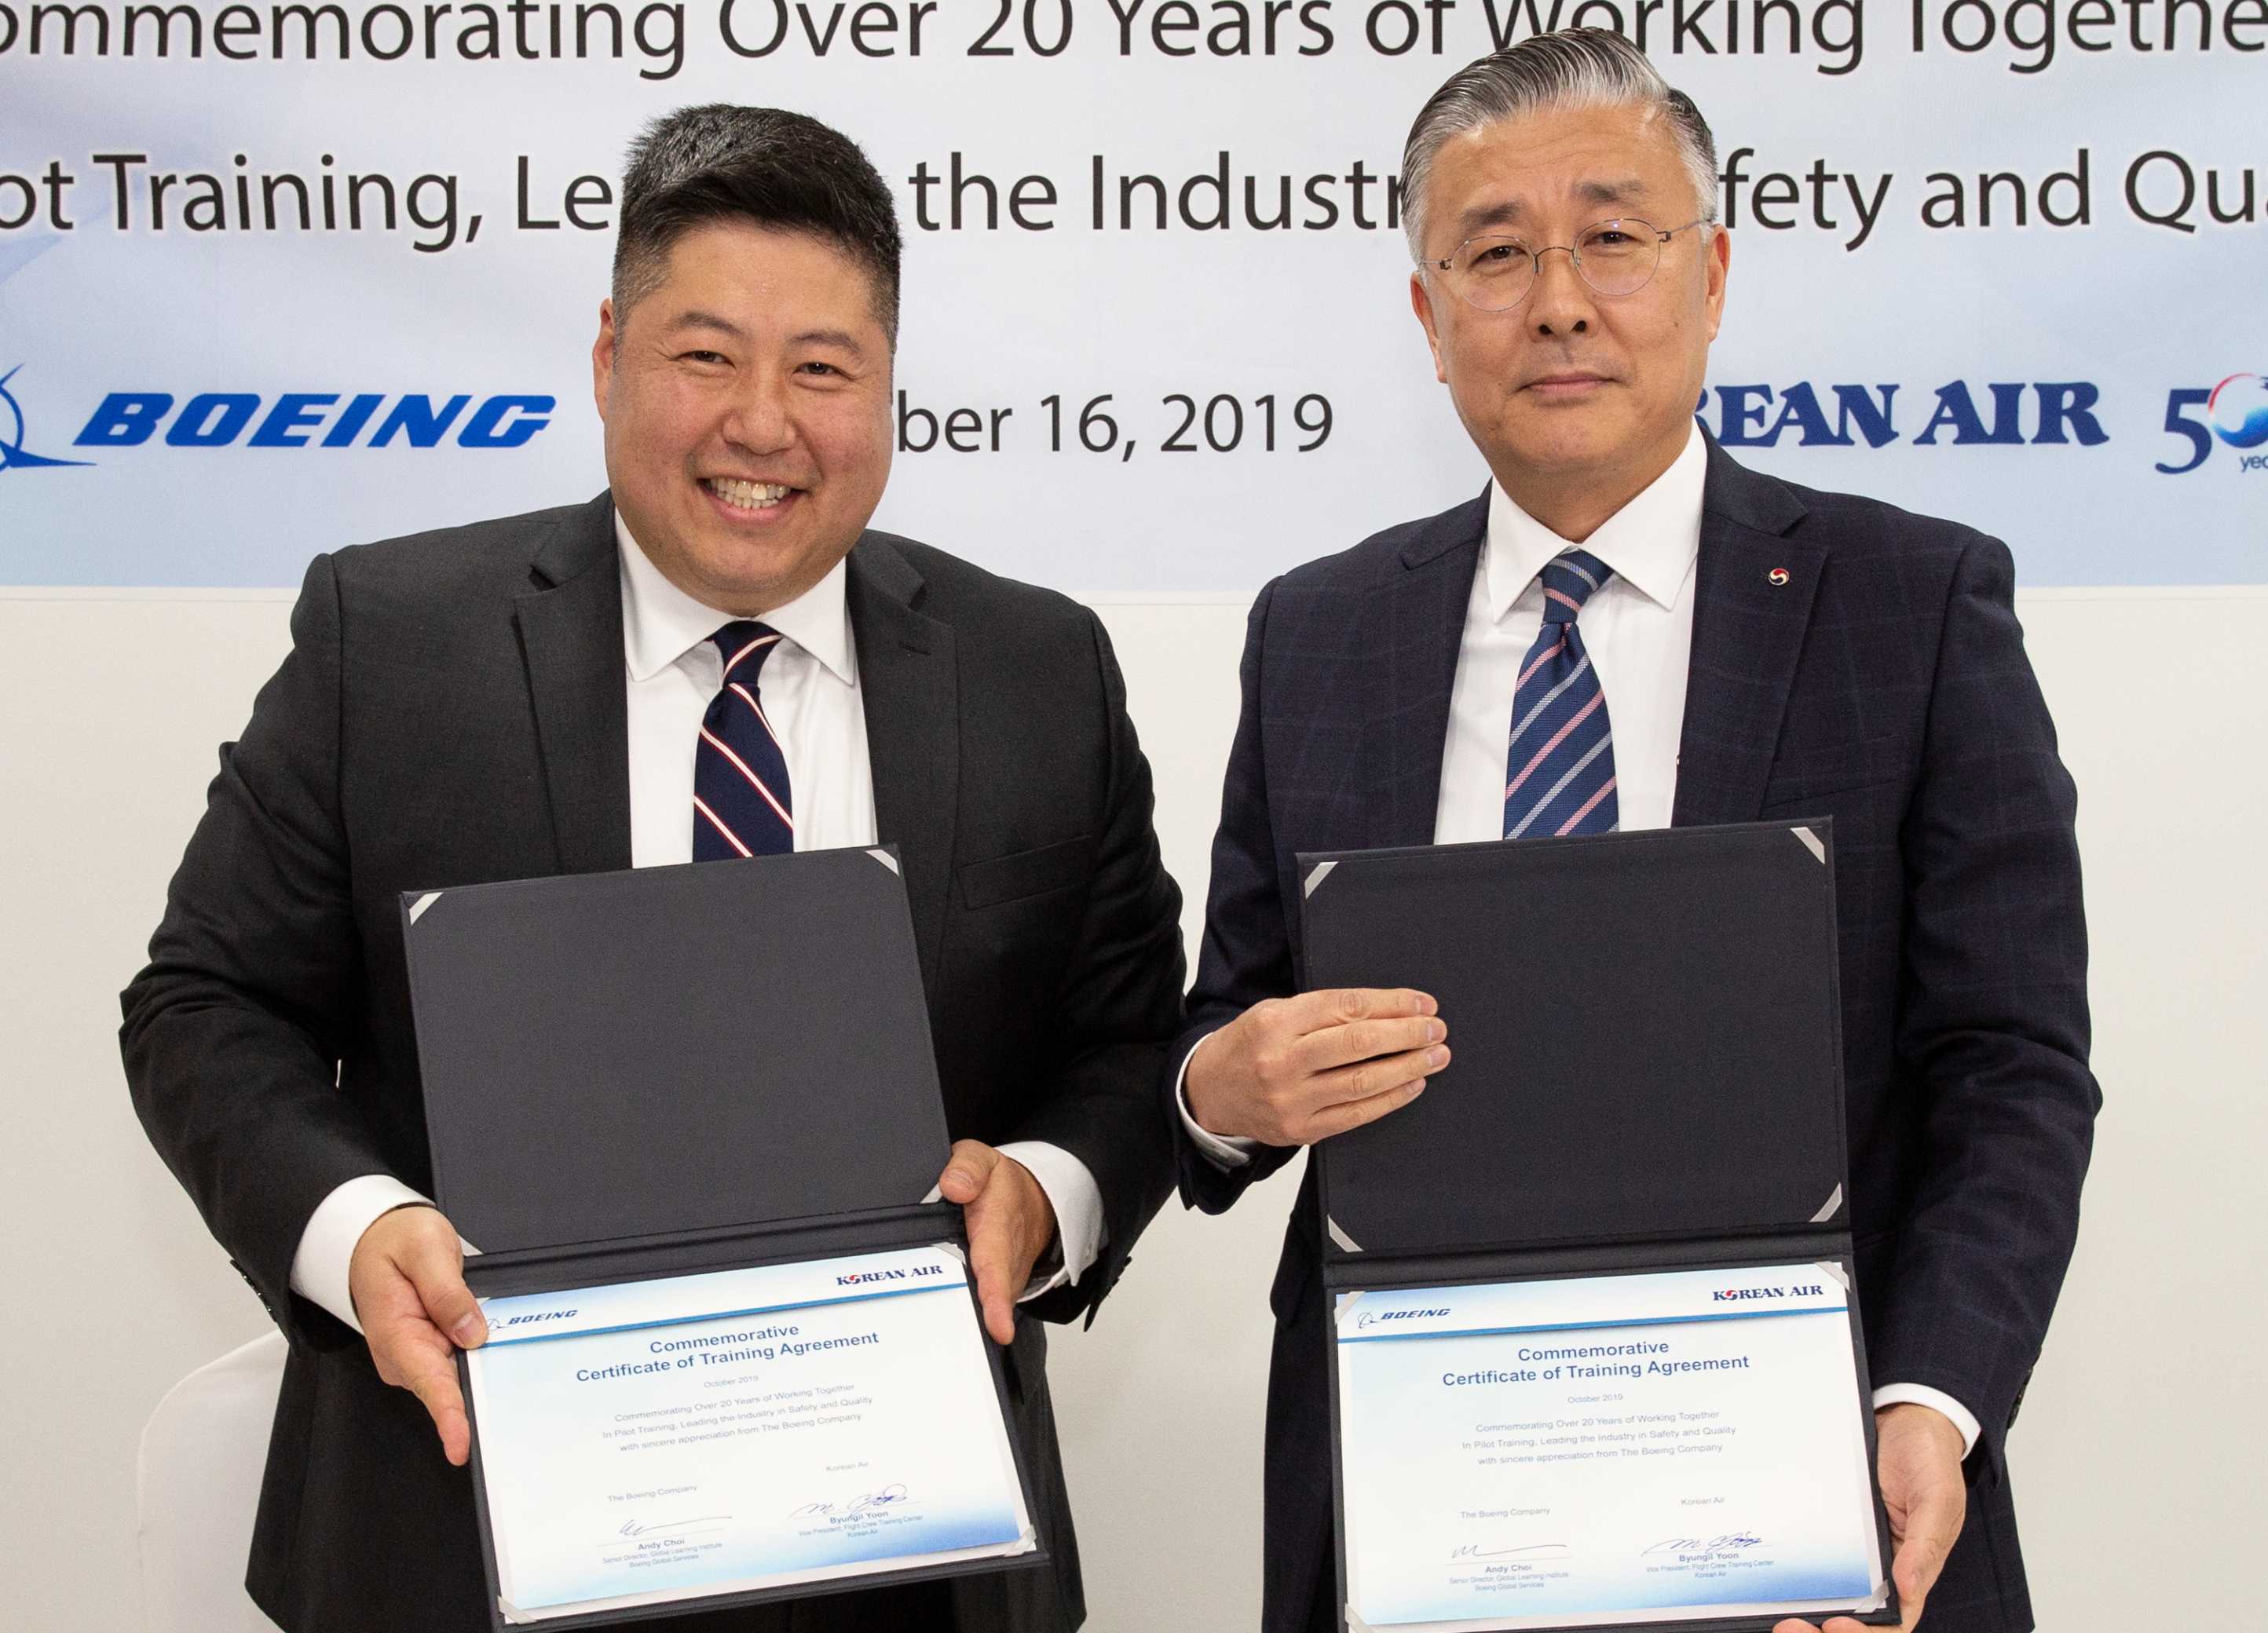 Andy Choi, LLOC, Boeing (left) with Byungil Yoon, VP, Flight Training Center, Korean Airlines. Click to enlarge.